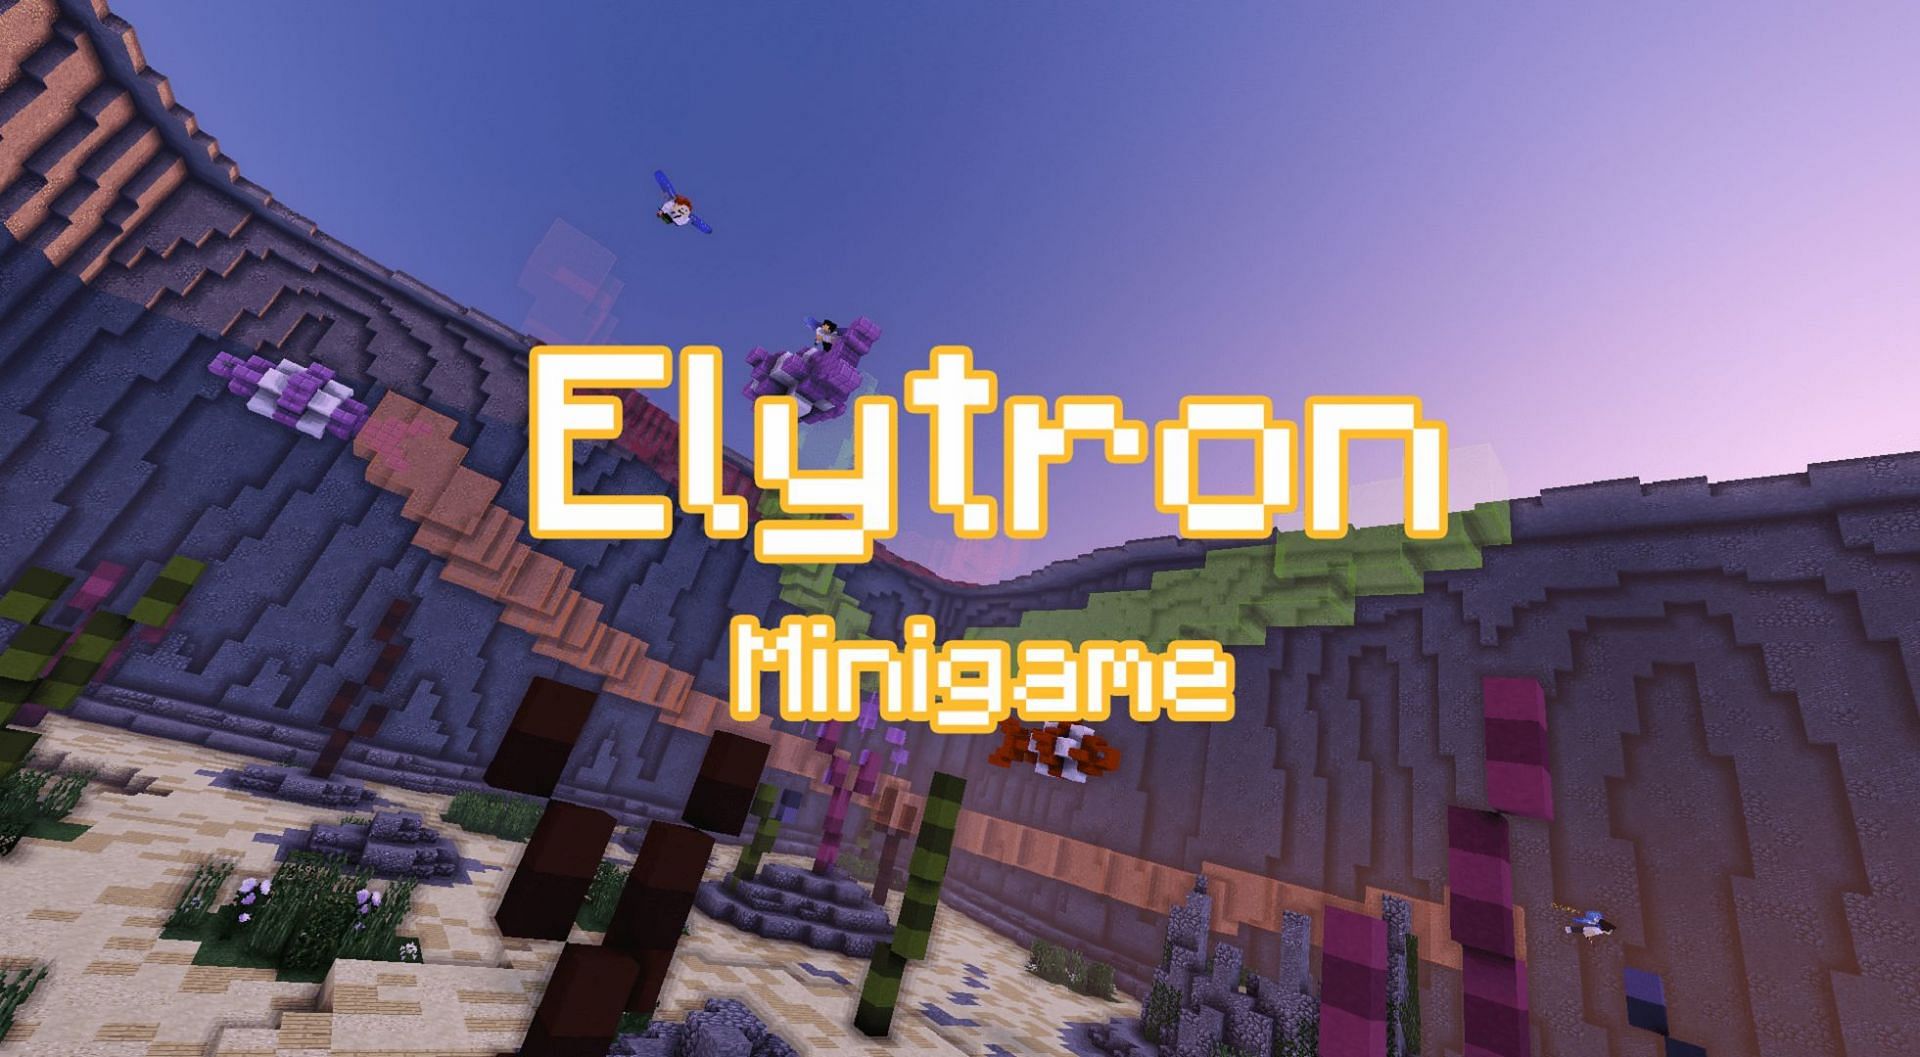 Fans of the Tron movies will get a real kick out of Elytron (Image via Theticman/Minecraft Maps)